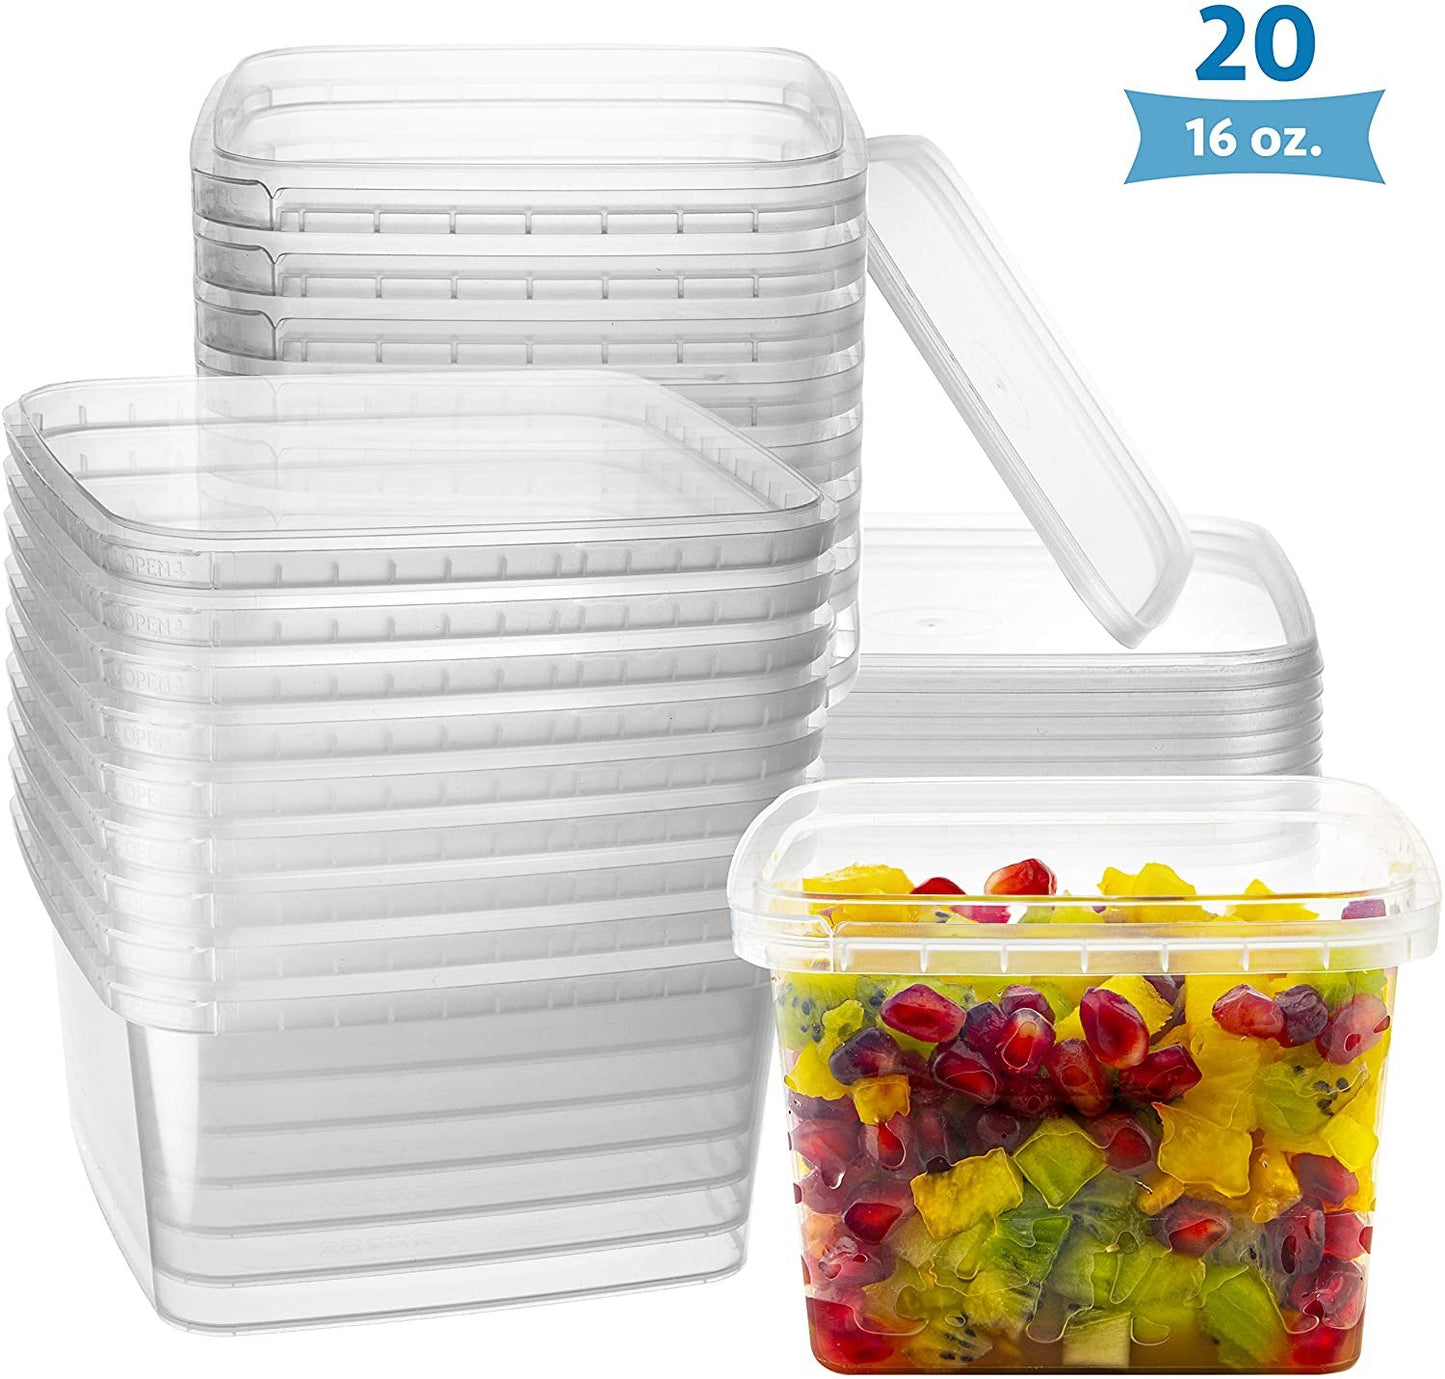 Sturdy, Reusable, Fantastic Deli Containers with Lids - Perfect 16